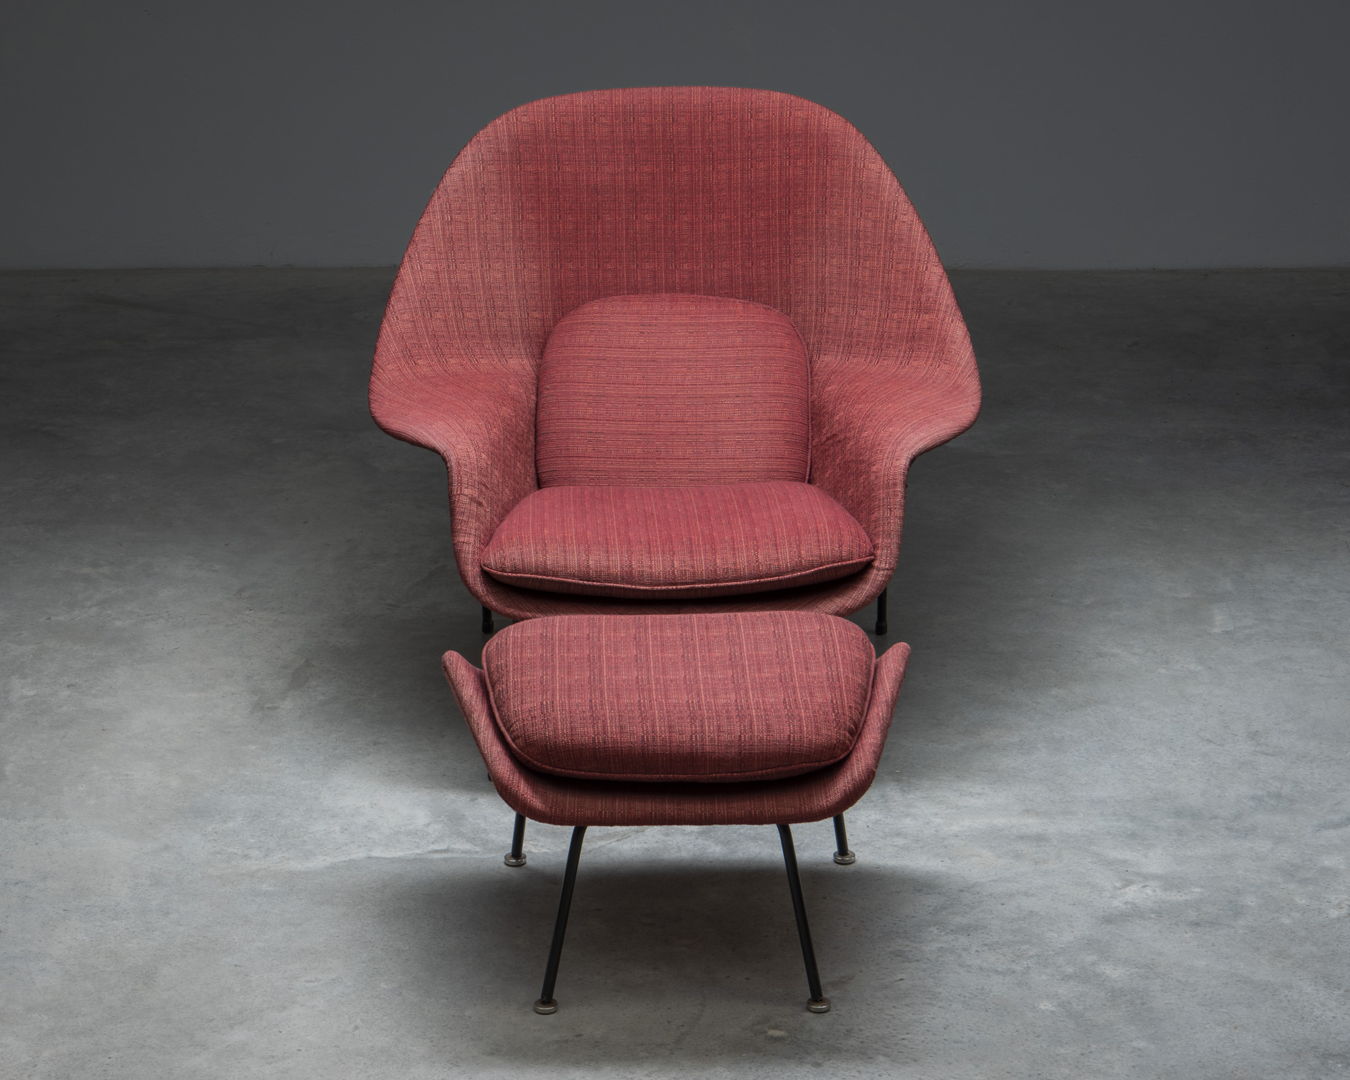 'Womb Chair' with ottoman, designed in 1946 by Eero Saarinen for Knoll Int